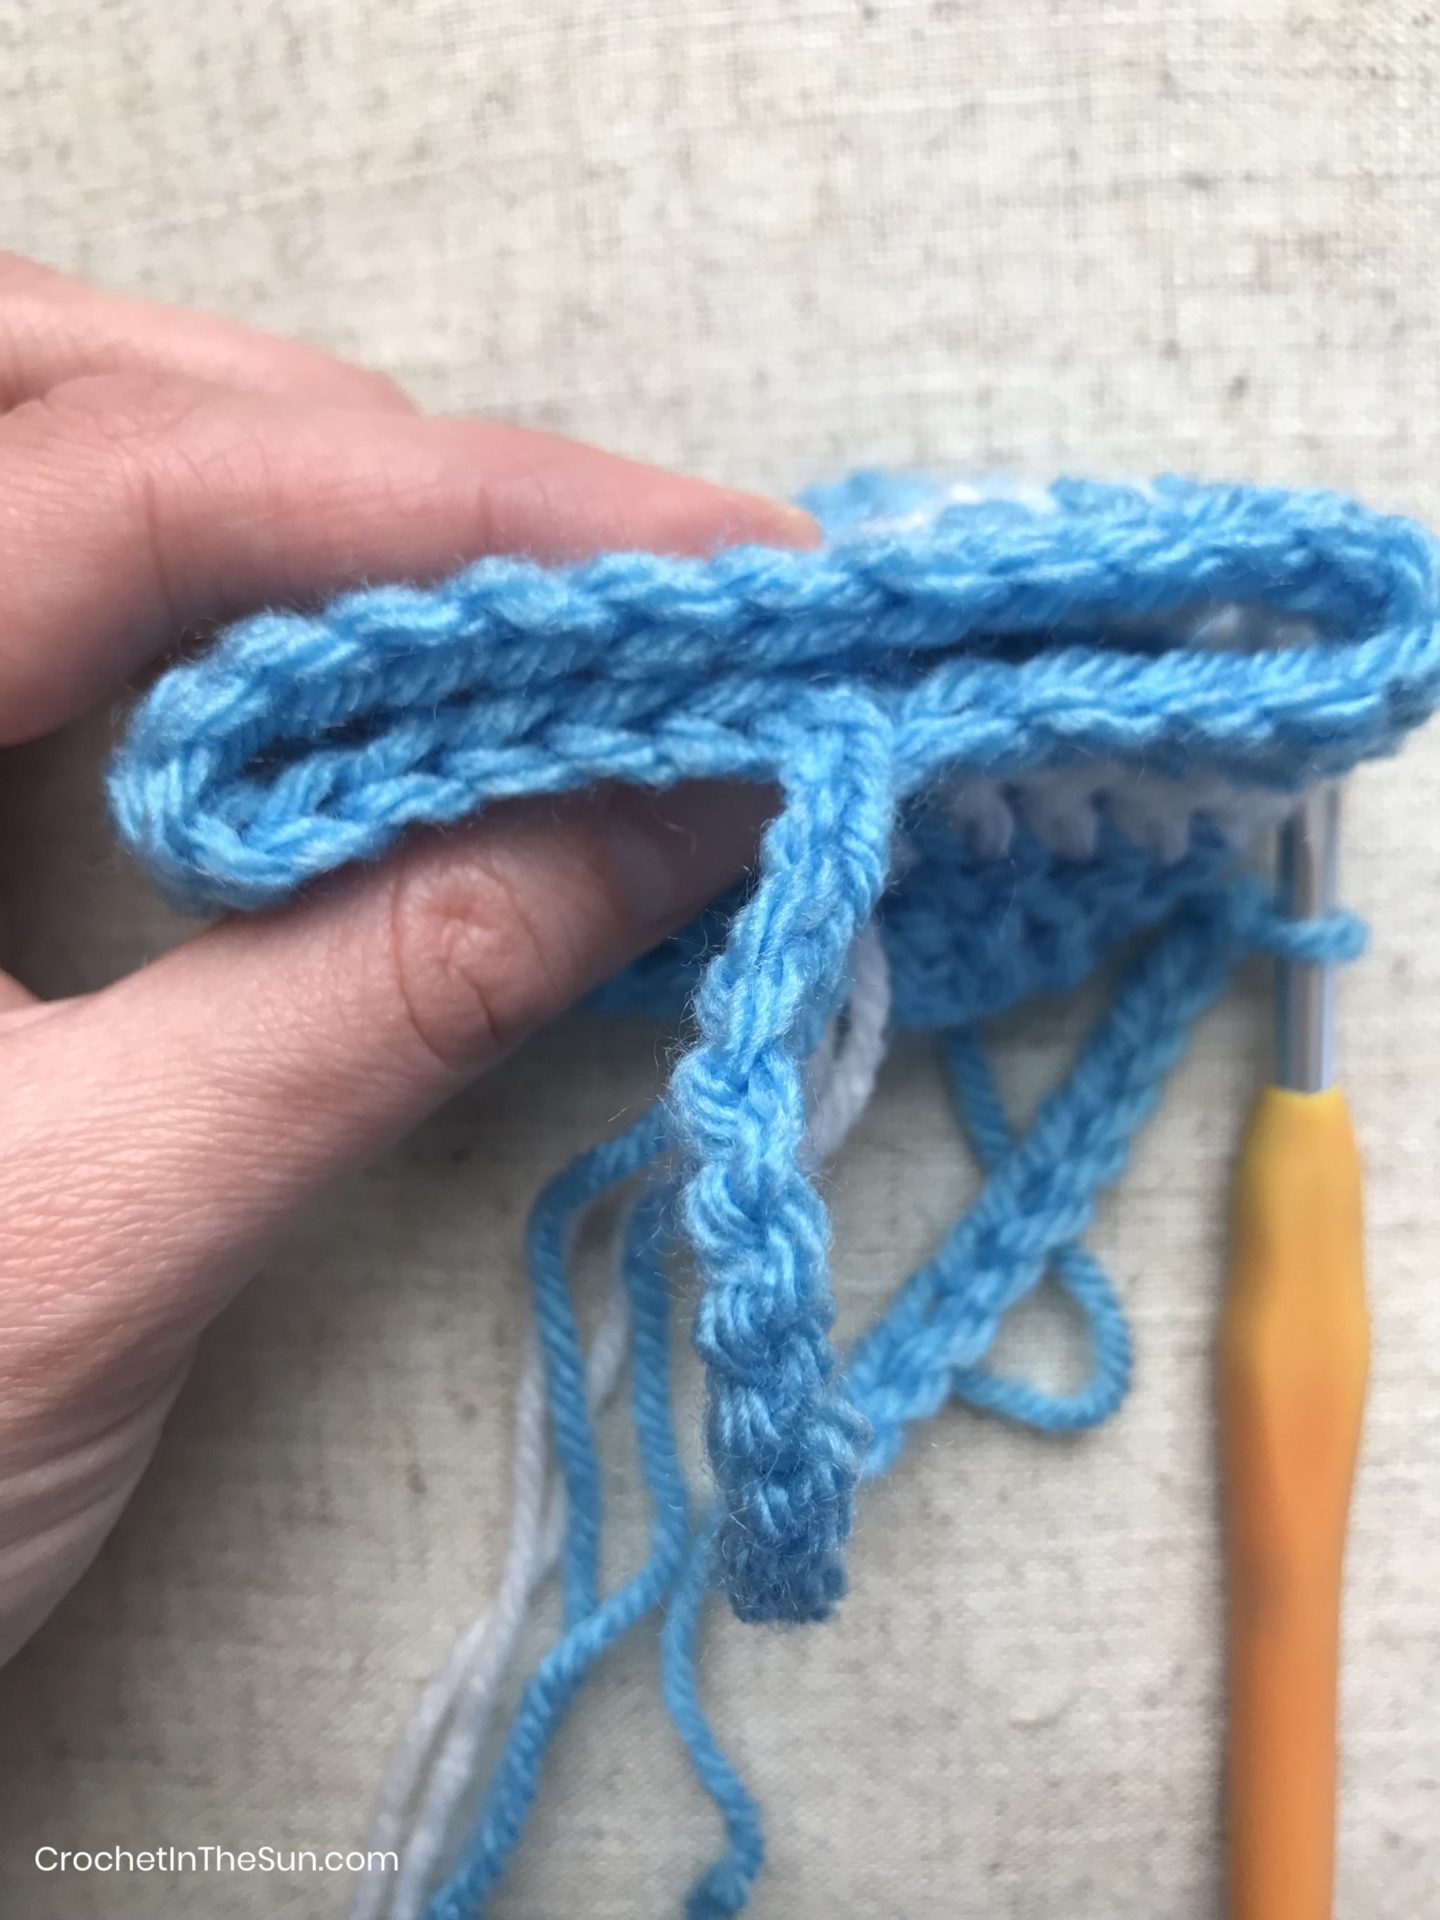 How to attach the handle to the crochet basket: Fold together and align the top stitches. This will help you see where to slip stitch to attach the handle.. #crochet #crochetinthesun #howtocrochet #crochettutorial #crochetforbeginners